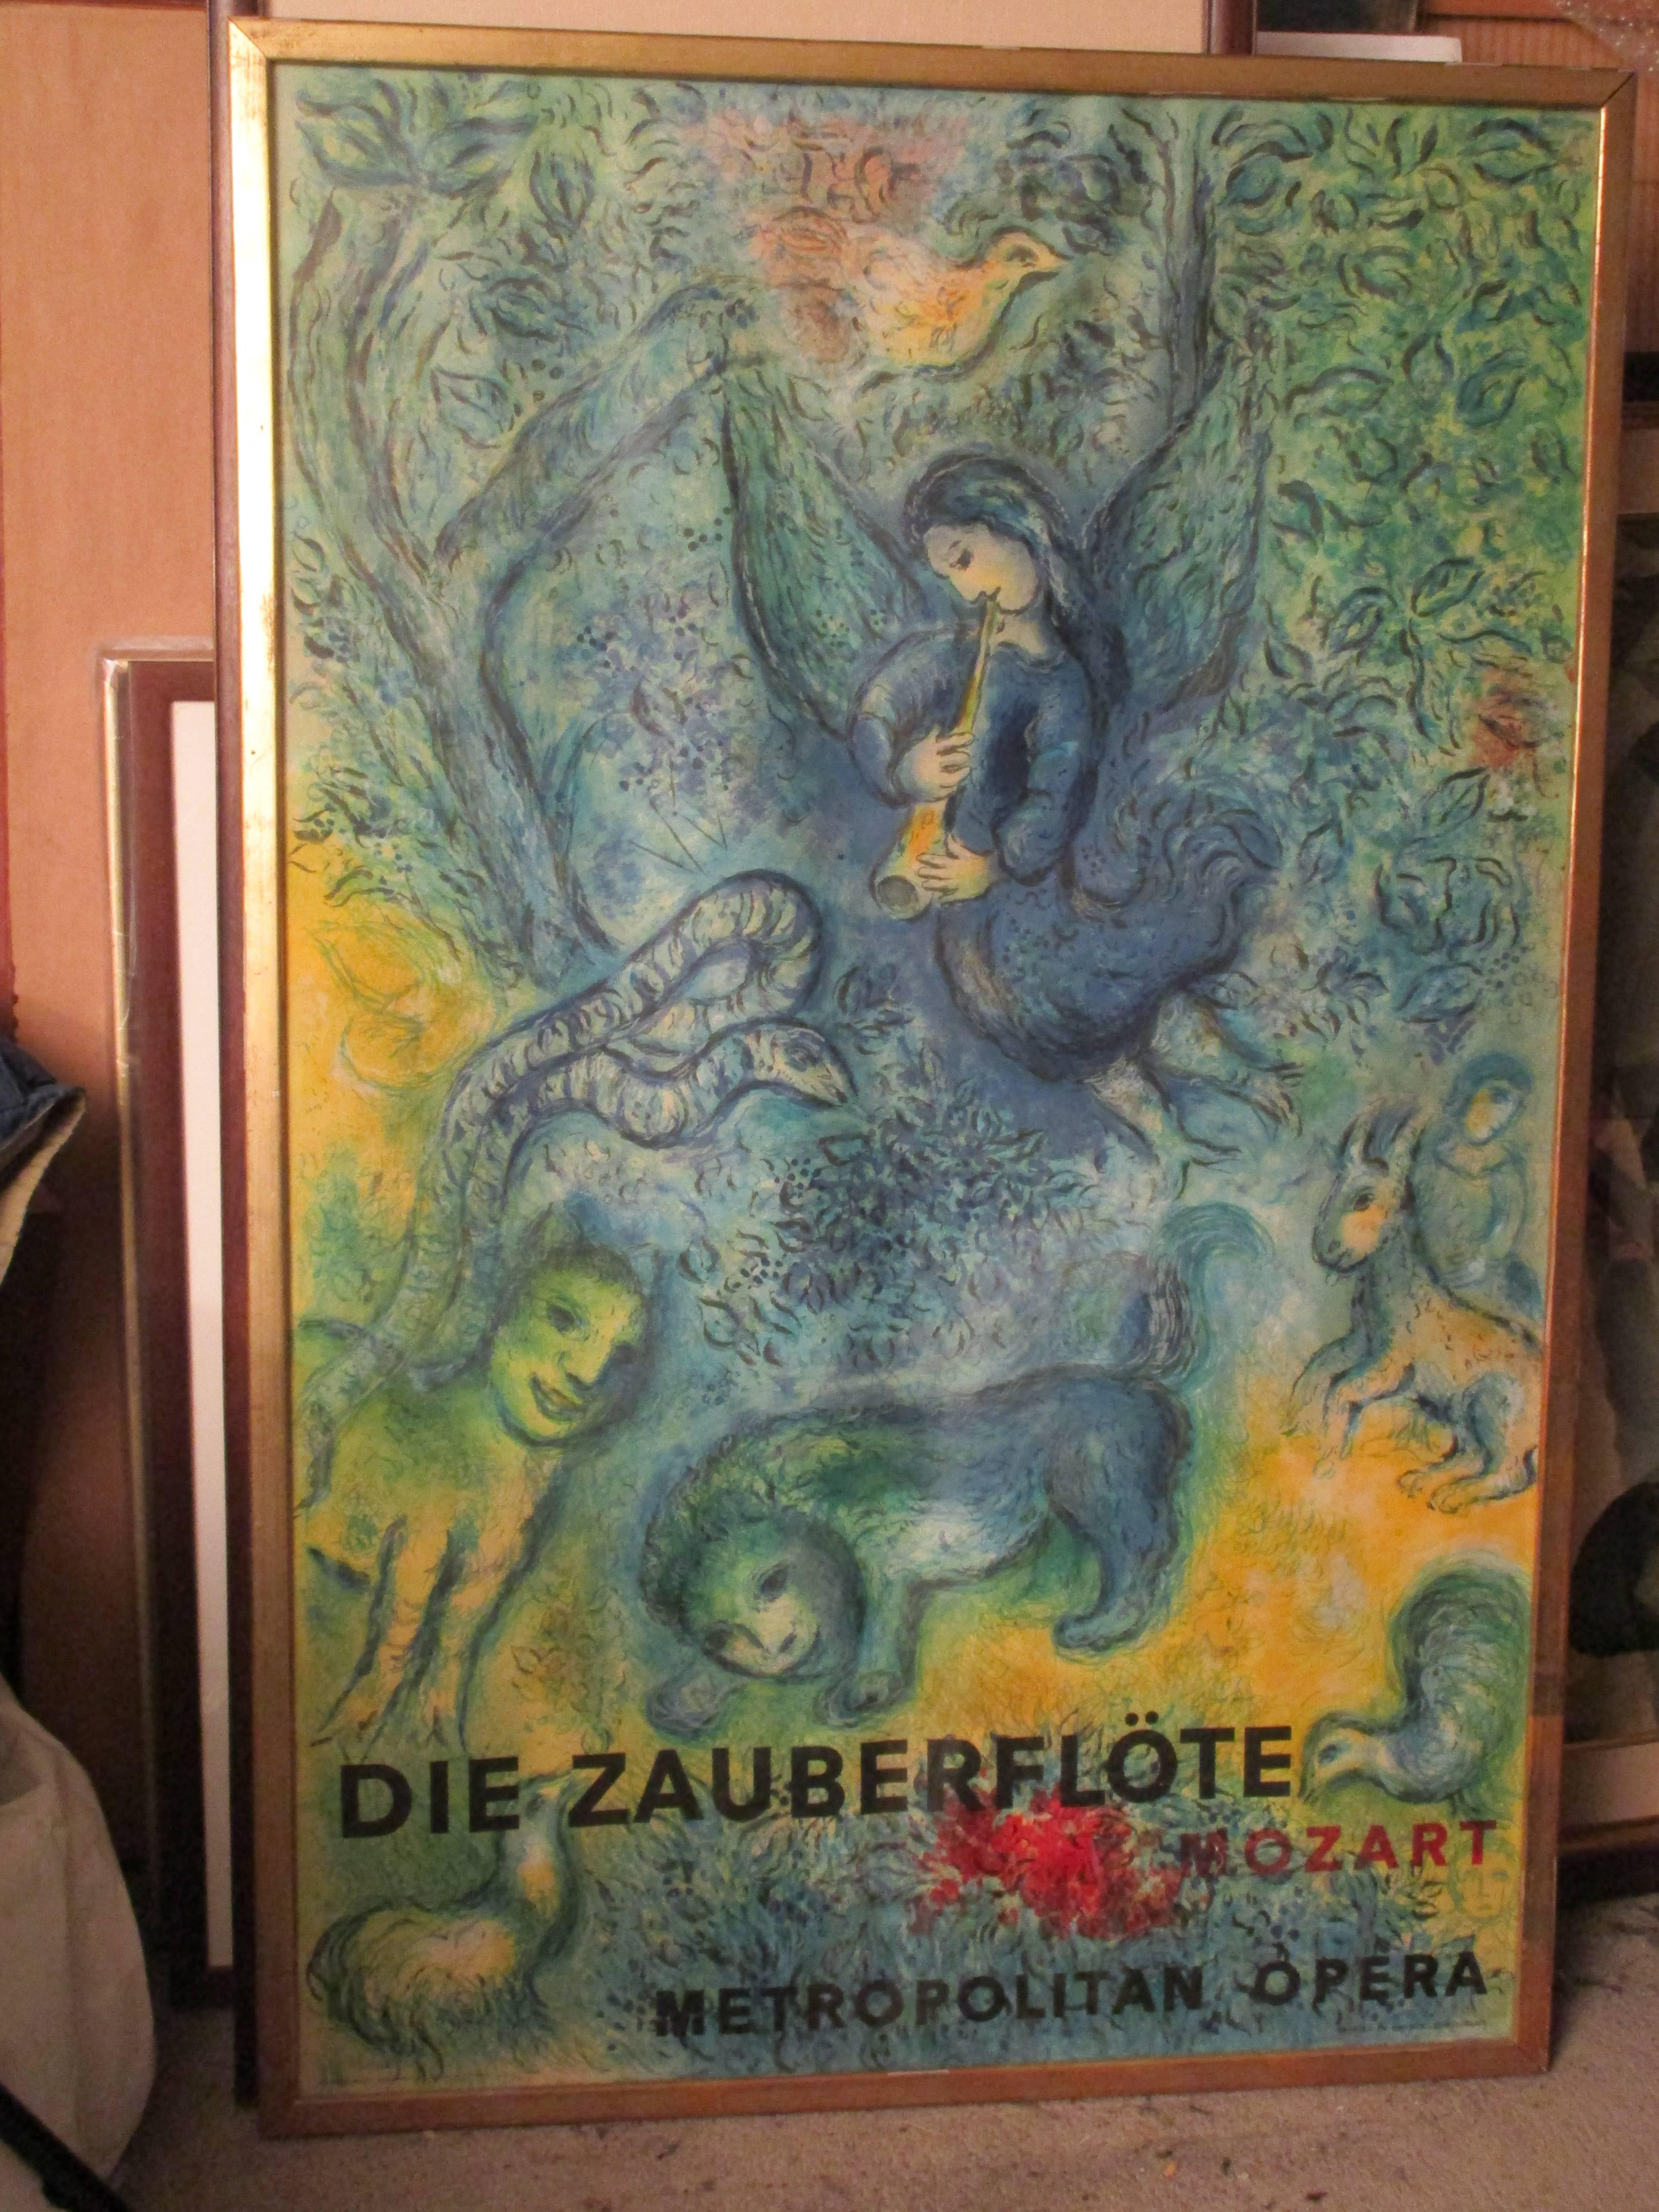 Marc Chagall 1960s metropolitan opera lithograph of Mozart's the magic flute in a gilt frame under glass.